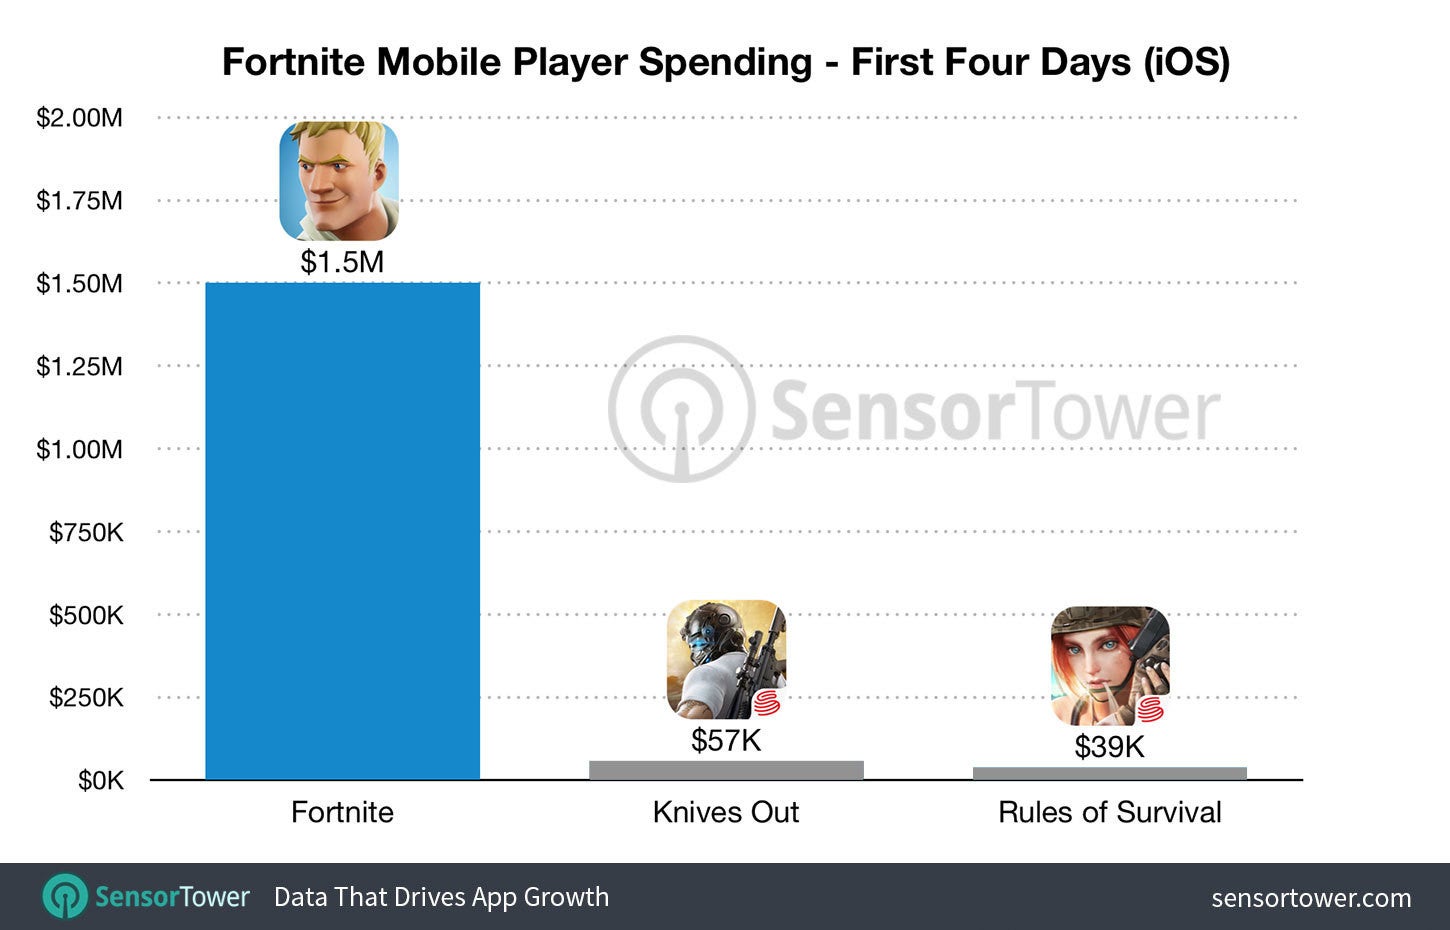 Fortnite rakes in $1.5 million on iOS in just 4 days, becomes #1 app in App Store